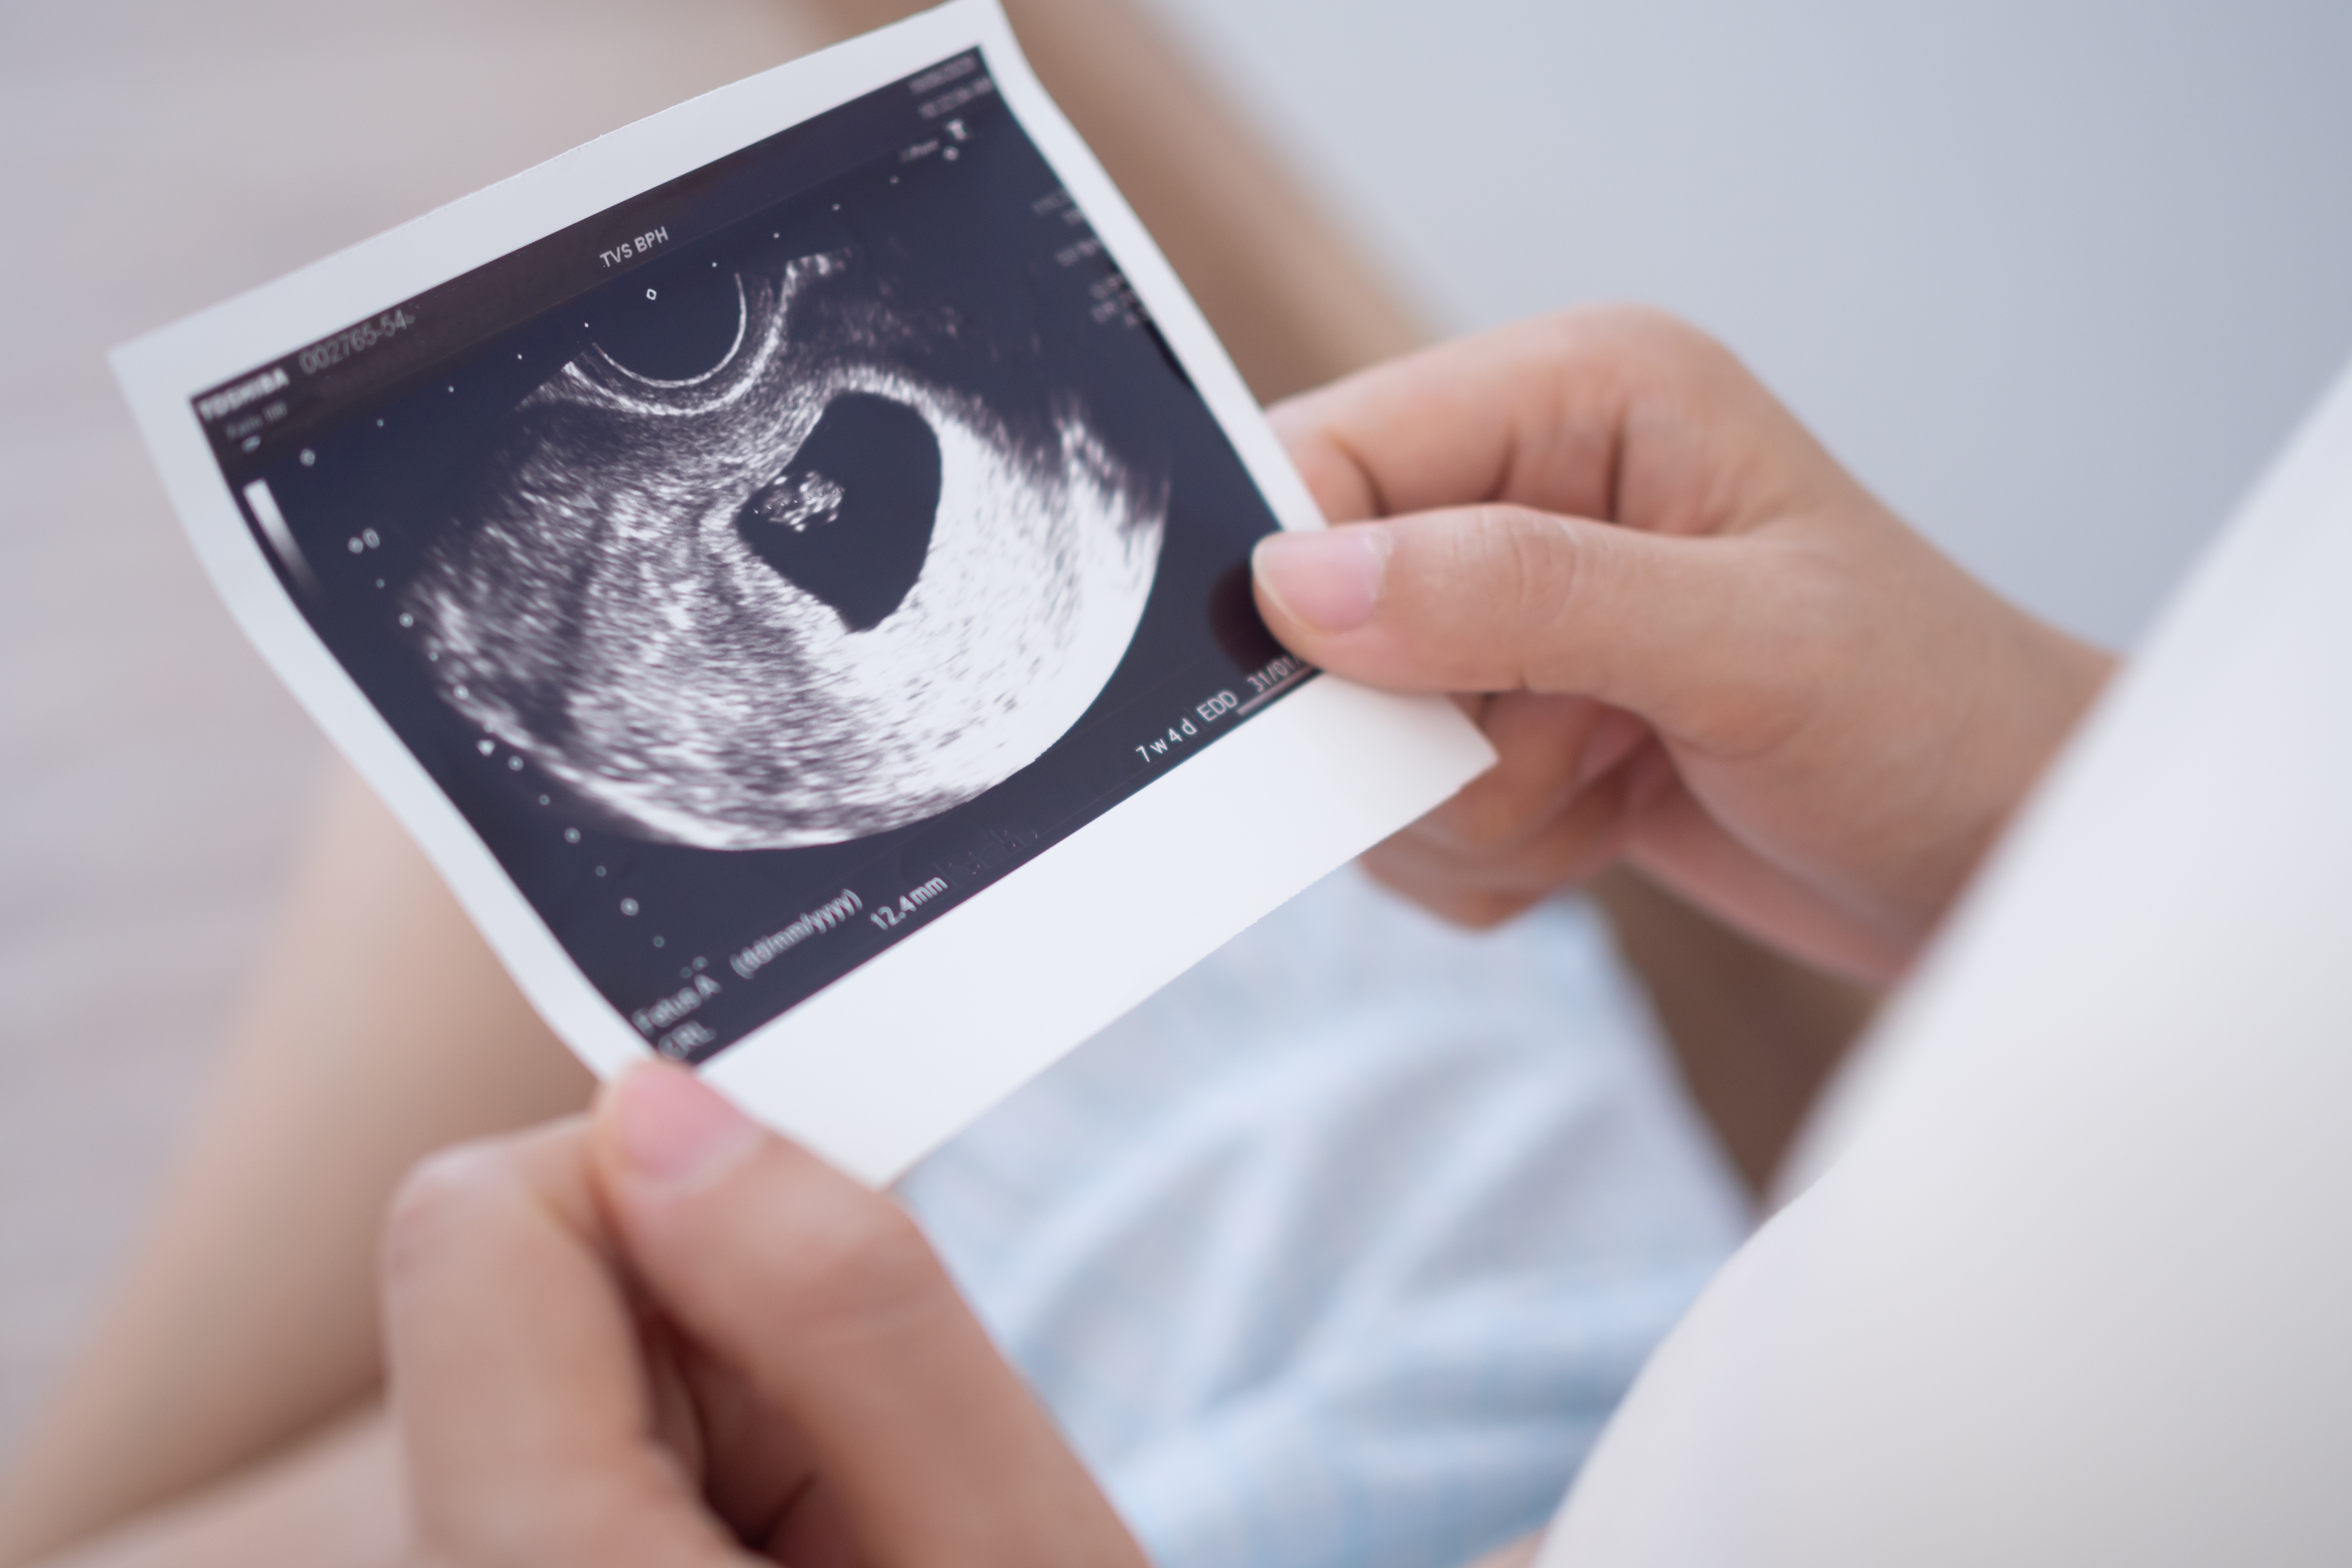 Pregnant woman looking at an ultrasound photo of fetus | Source: Shutterstock